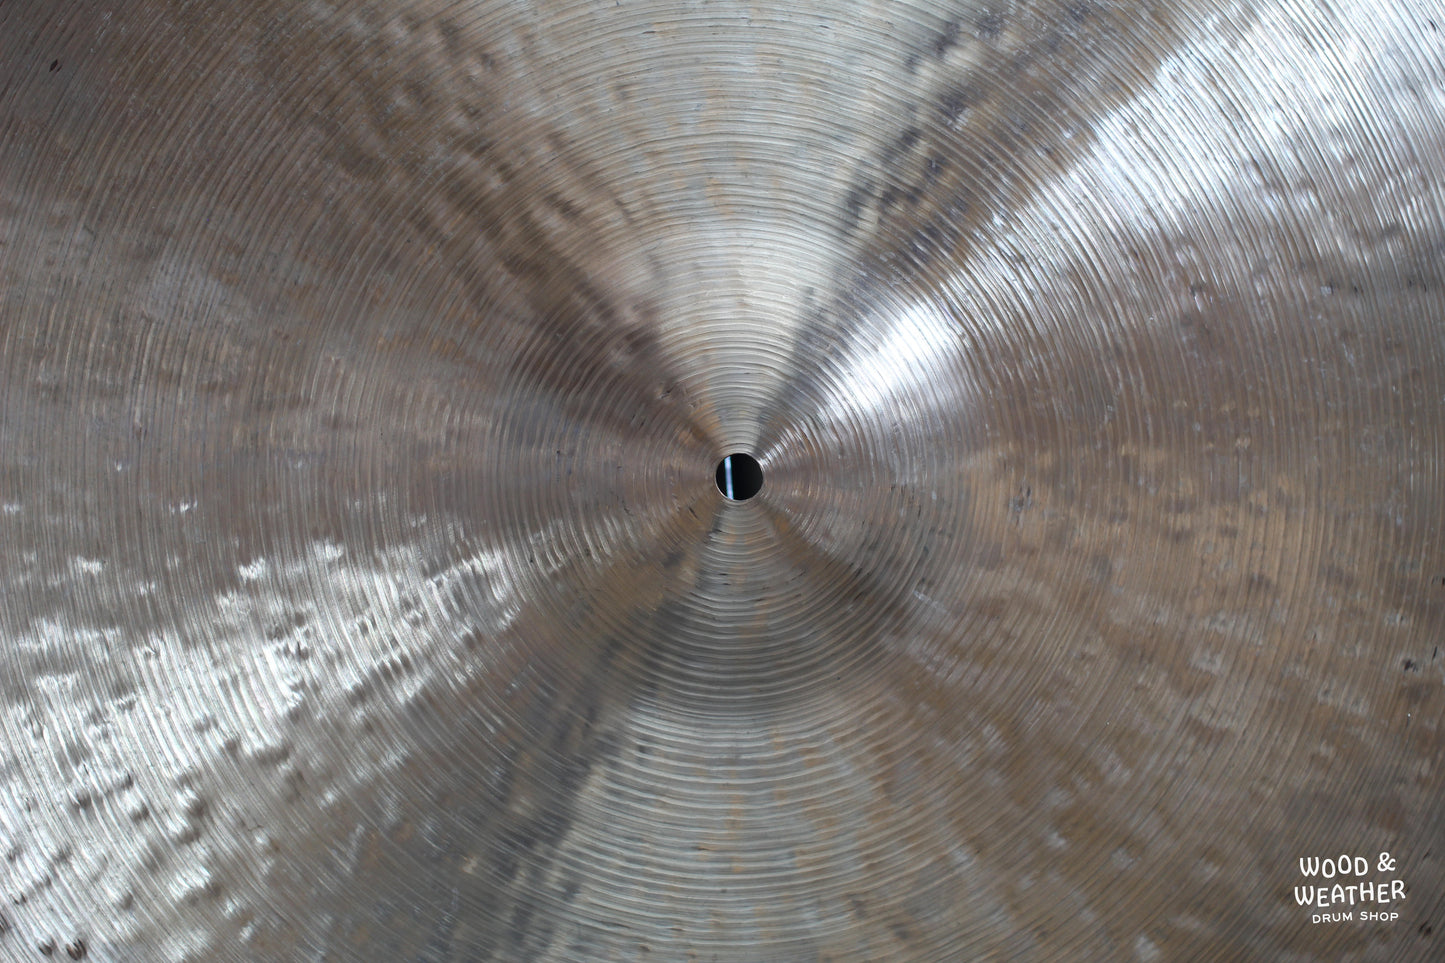 Used Istanbul Agop 22" Traditional Jazz Ride Cymbal 2332g